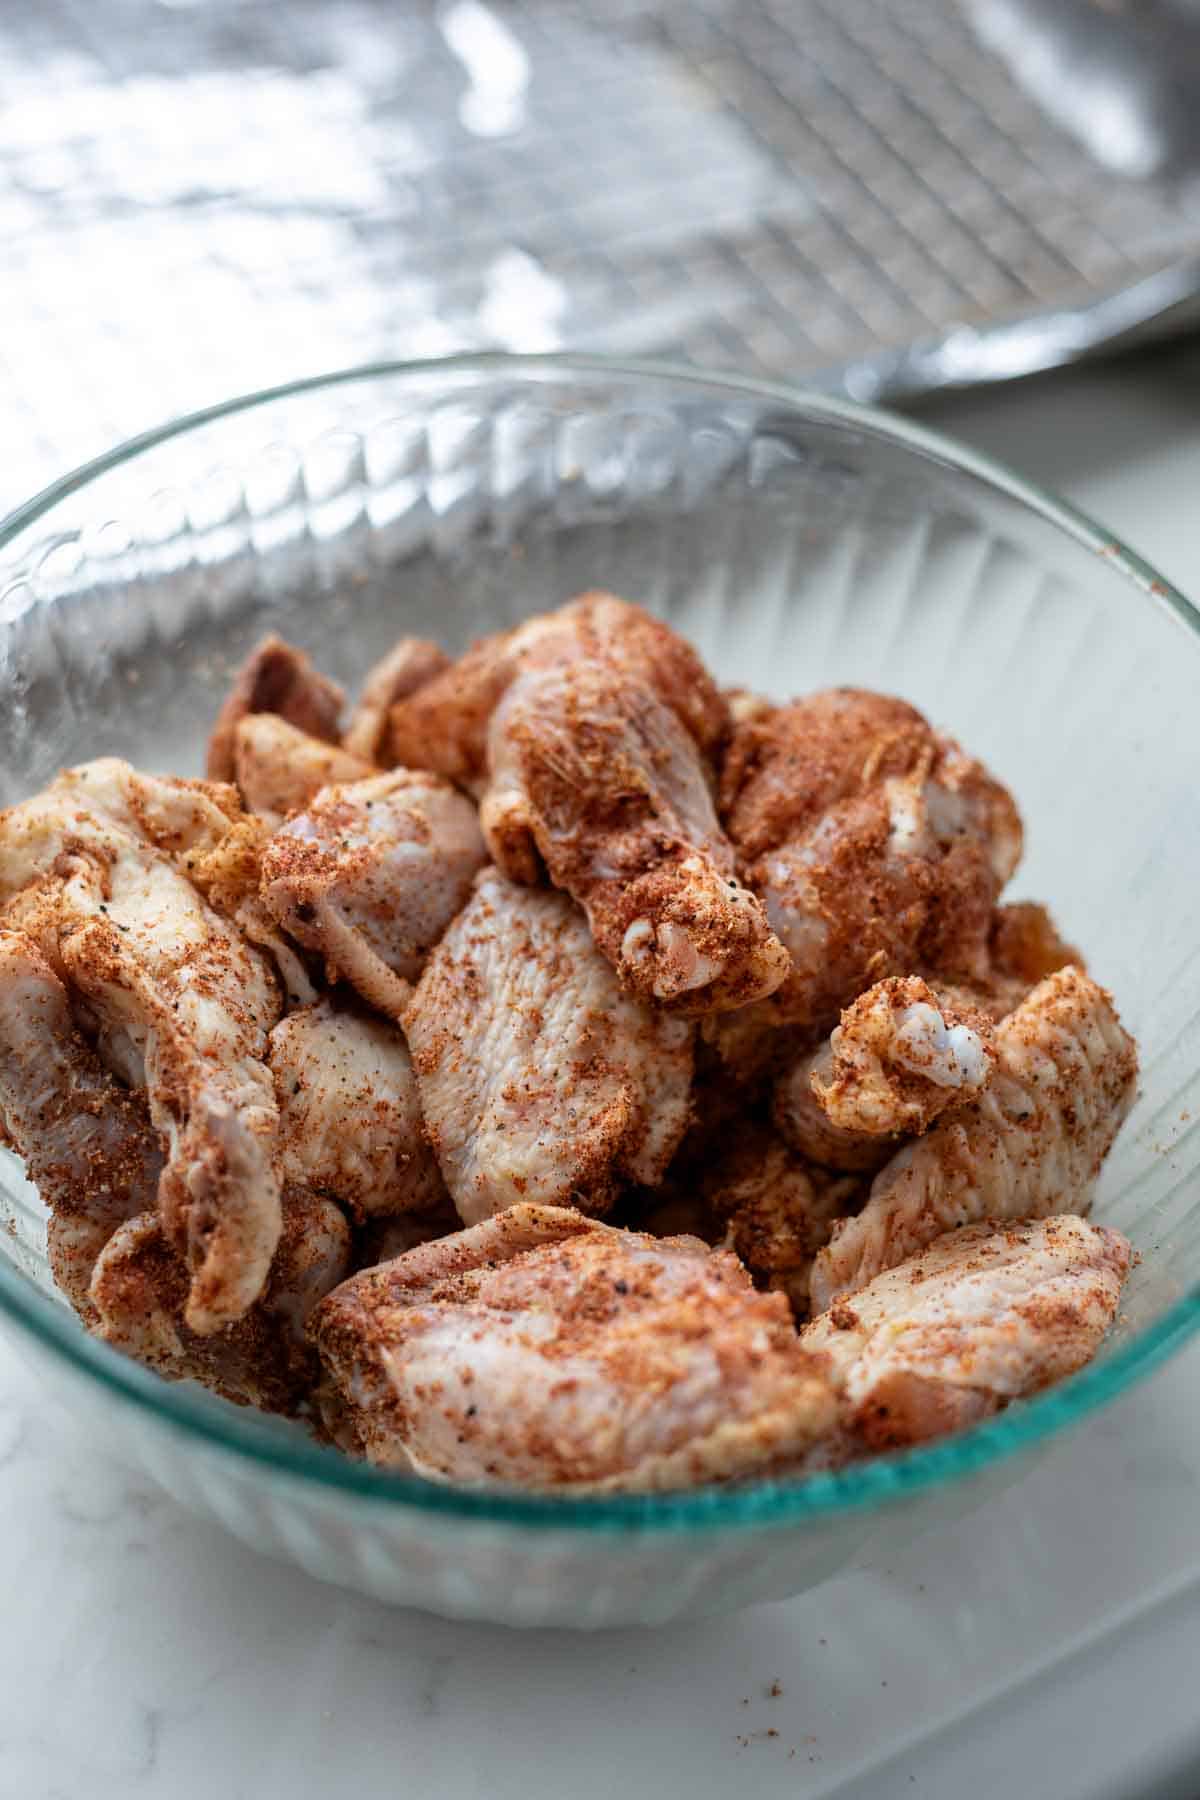 Chicken wings in a bowl coated in spices.